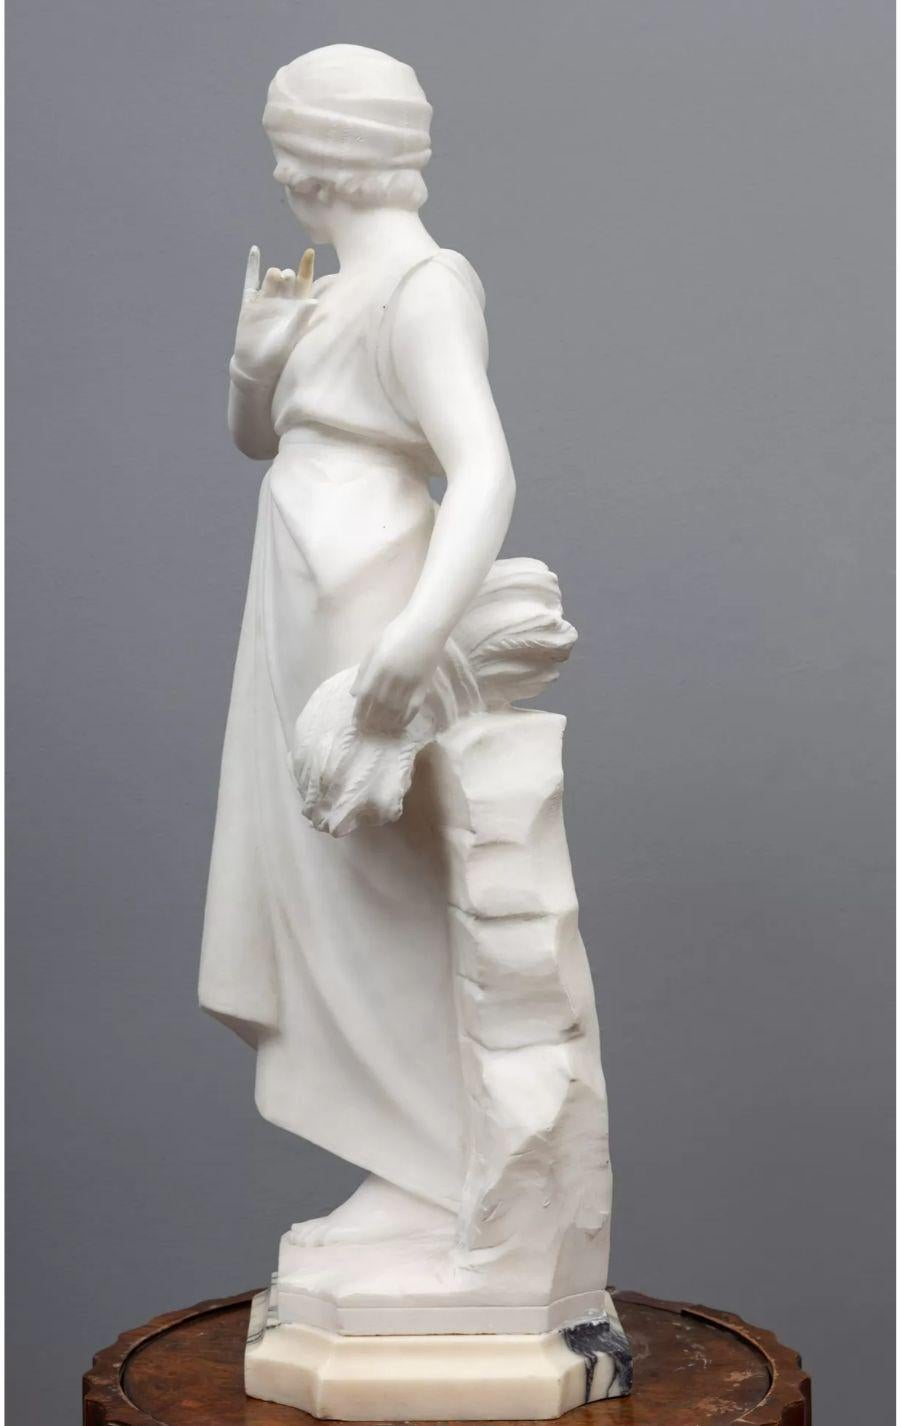 20th Century French Art Deco Carved White Marble Figure of a Flapper Girl For Sale